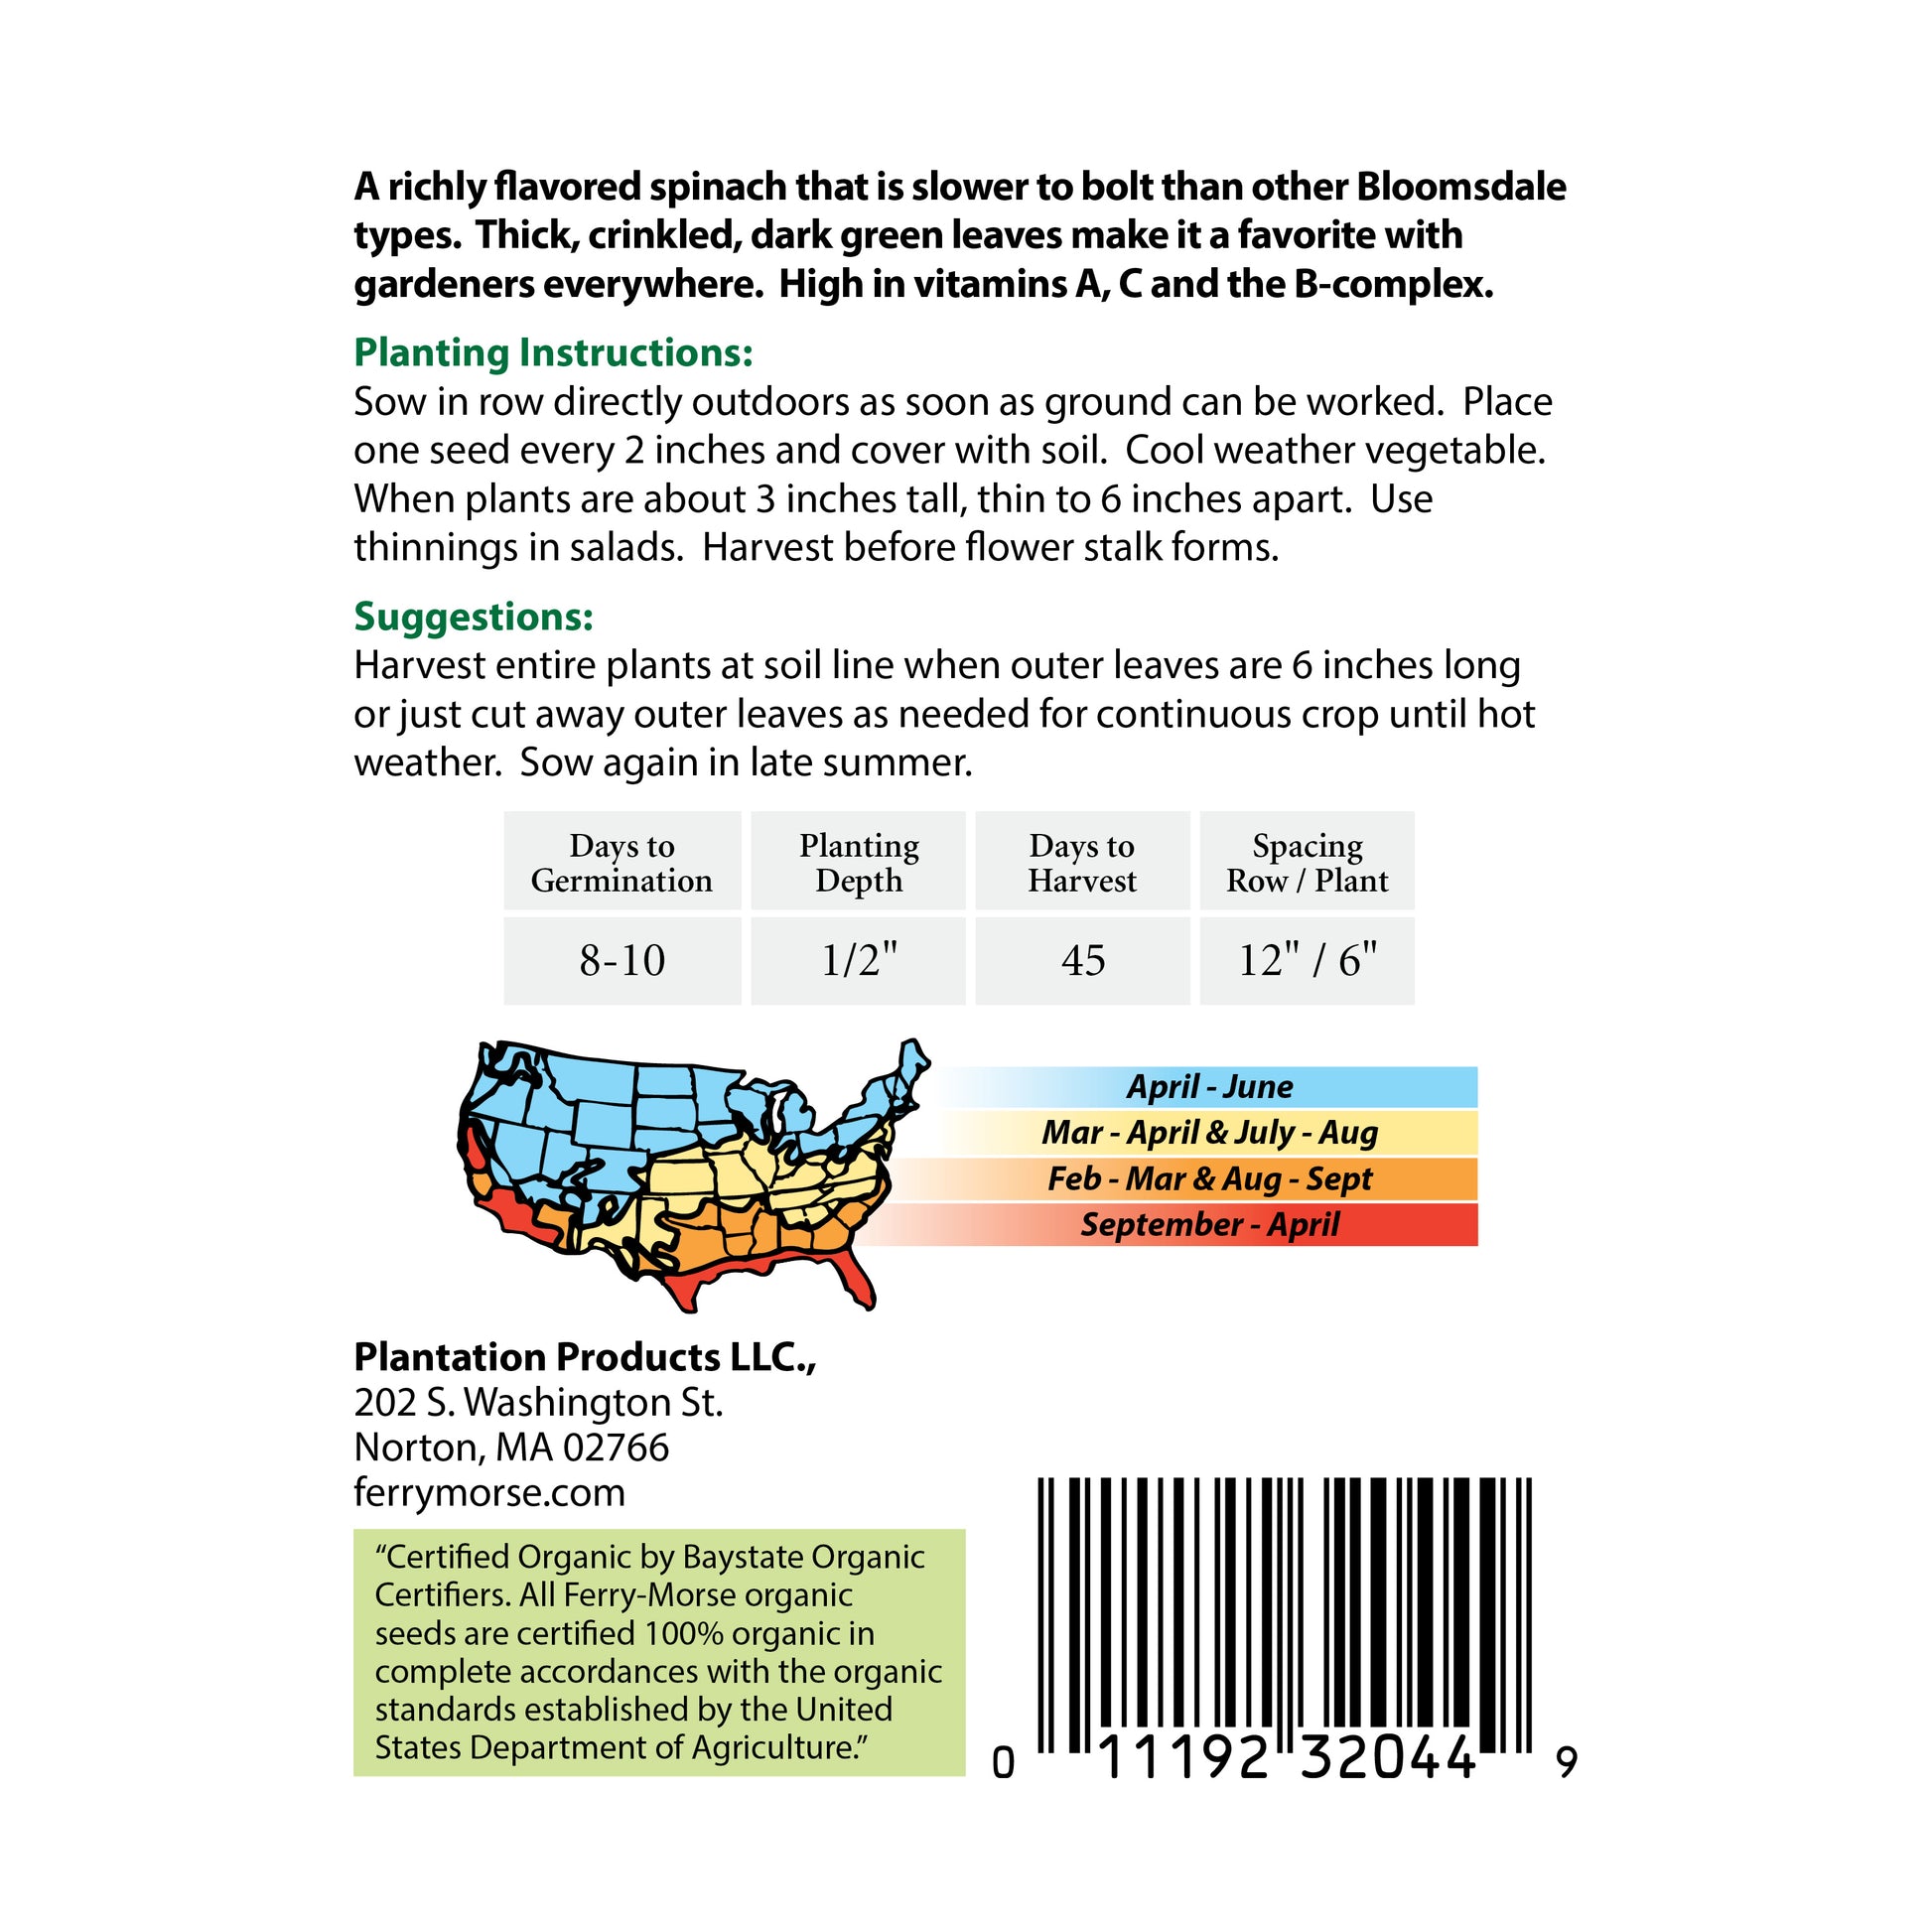 Image of the back of Organic Bloomsdale Long Standing Spinach seeds packet.